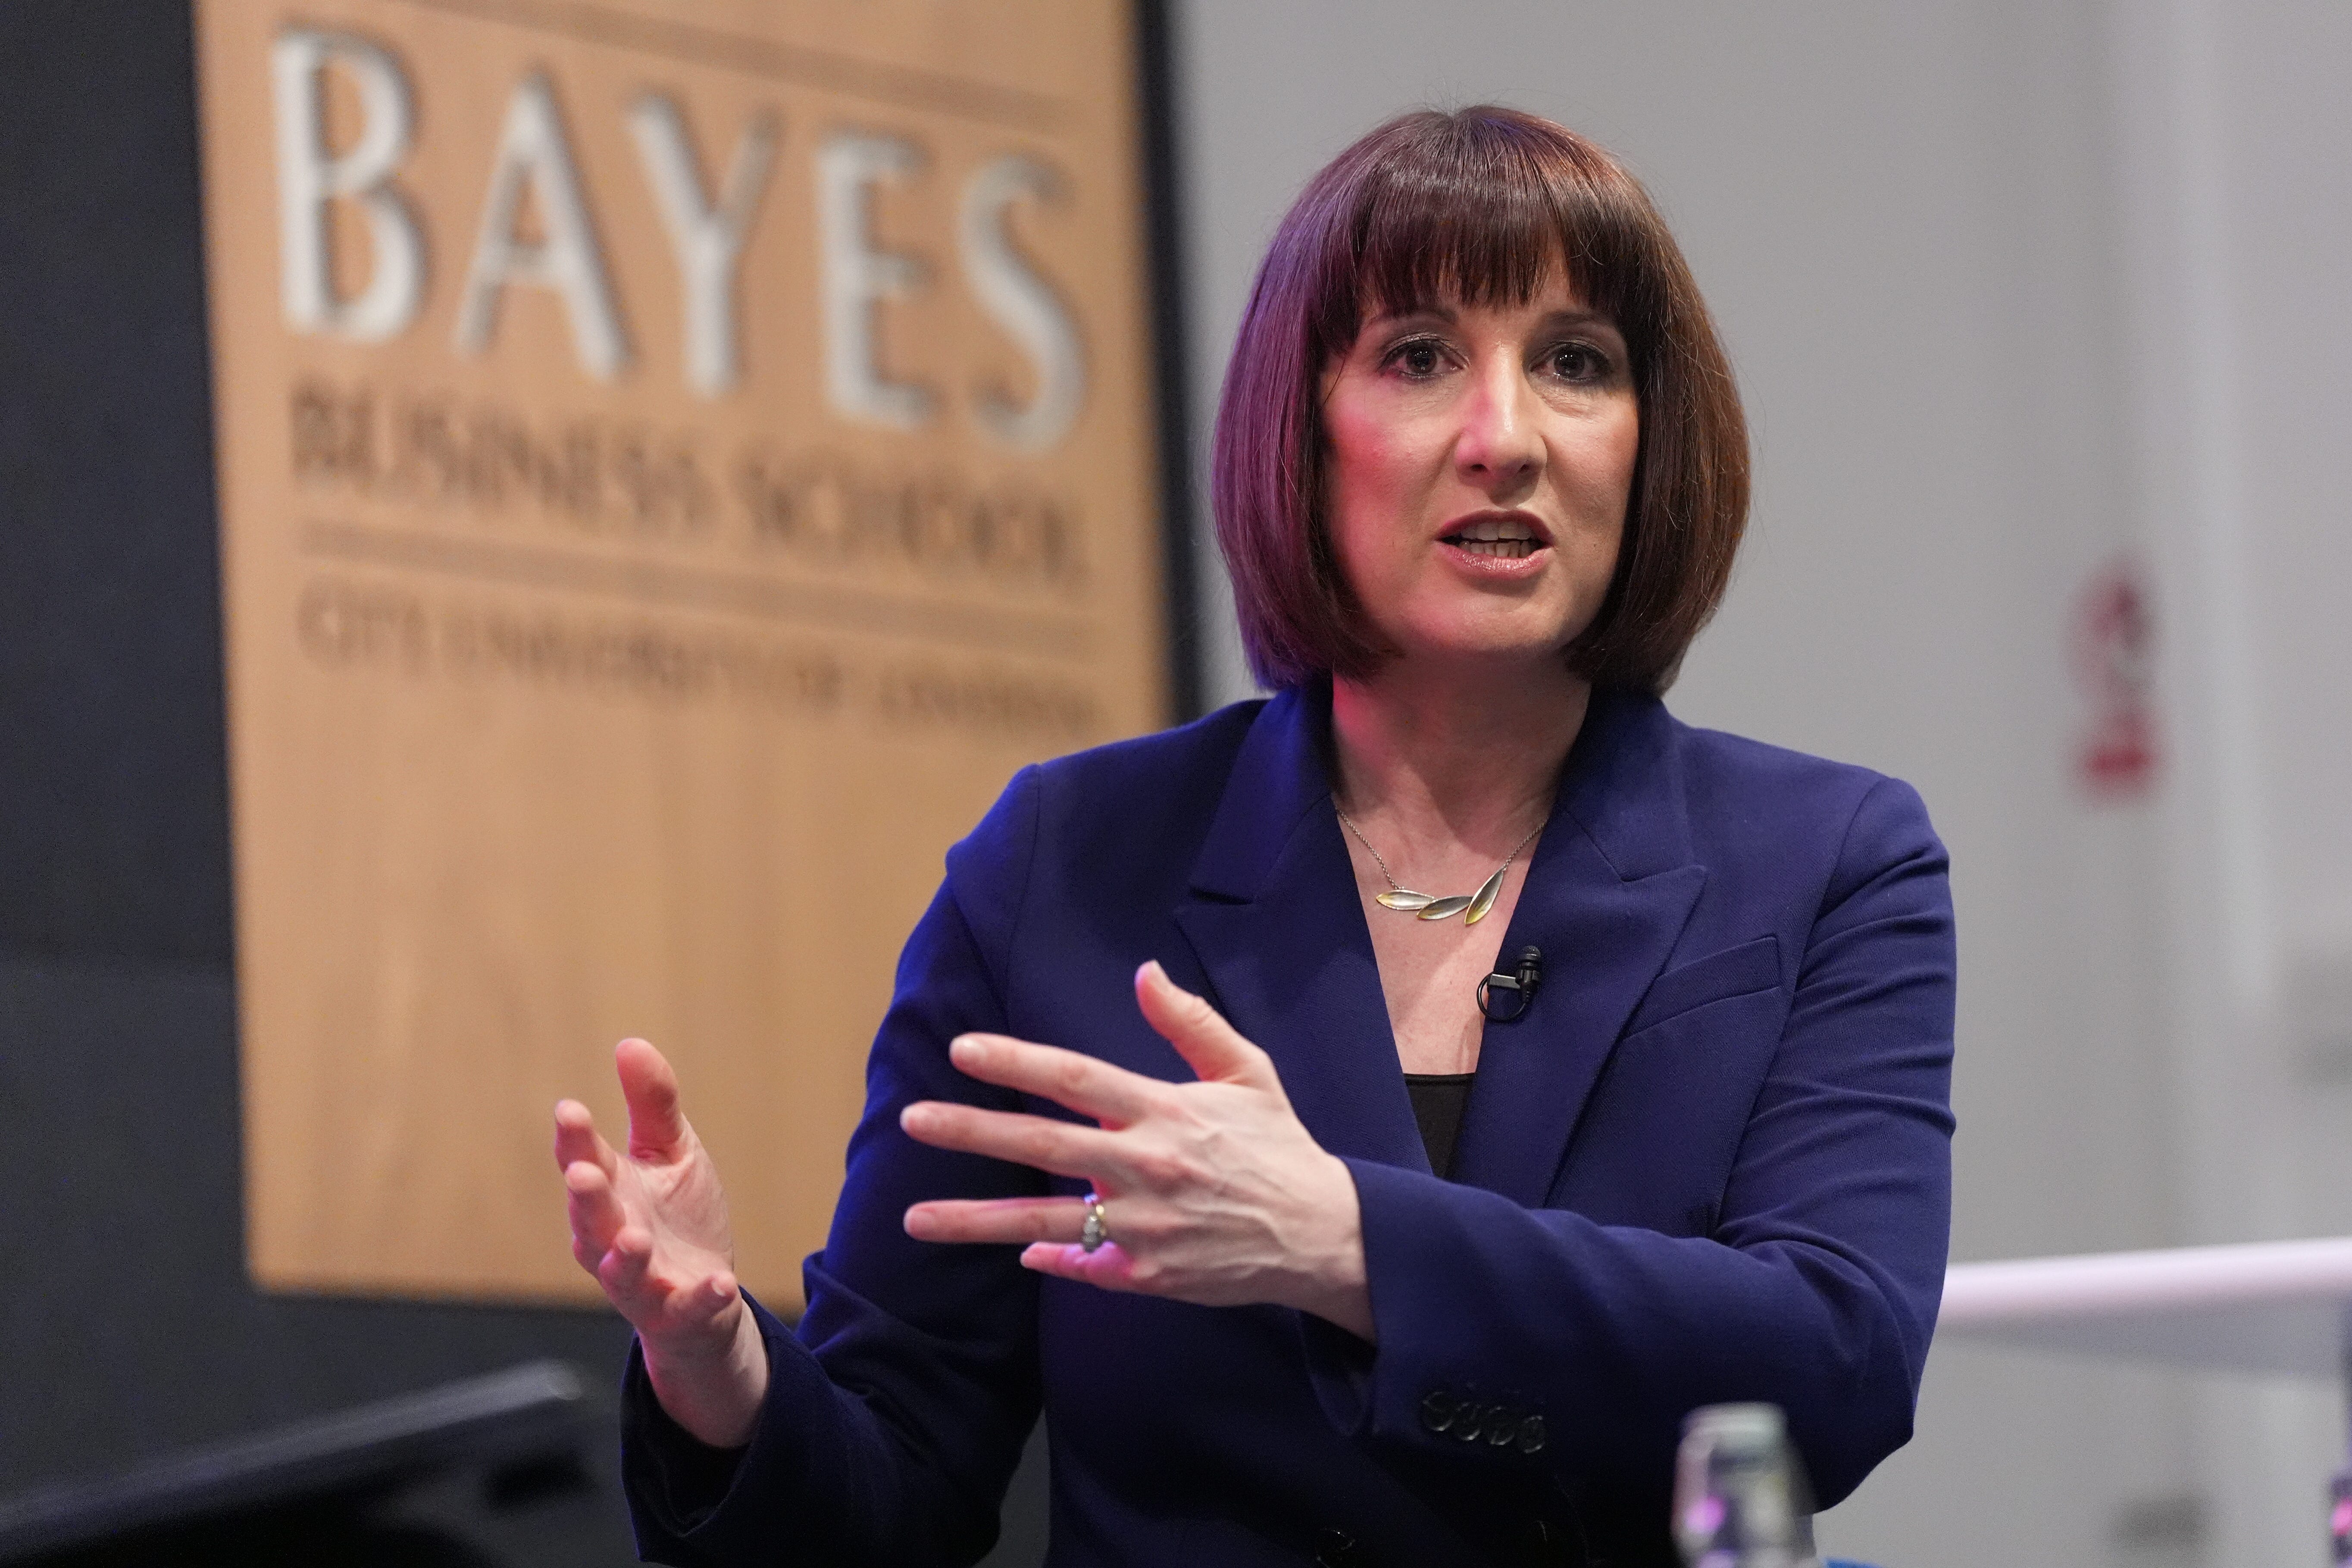 In her prestigious Mais lecture, Reeves hinted at her economic thinking but did not develop her ideas into a clear plan